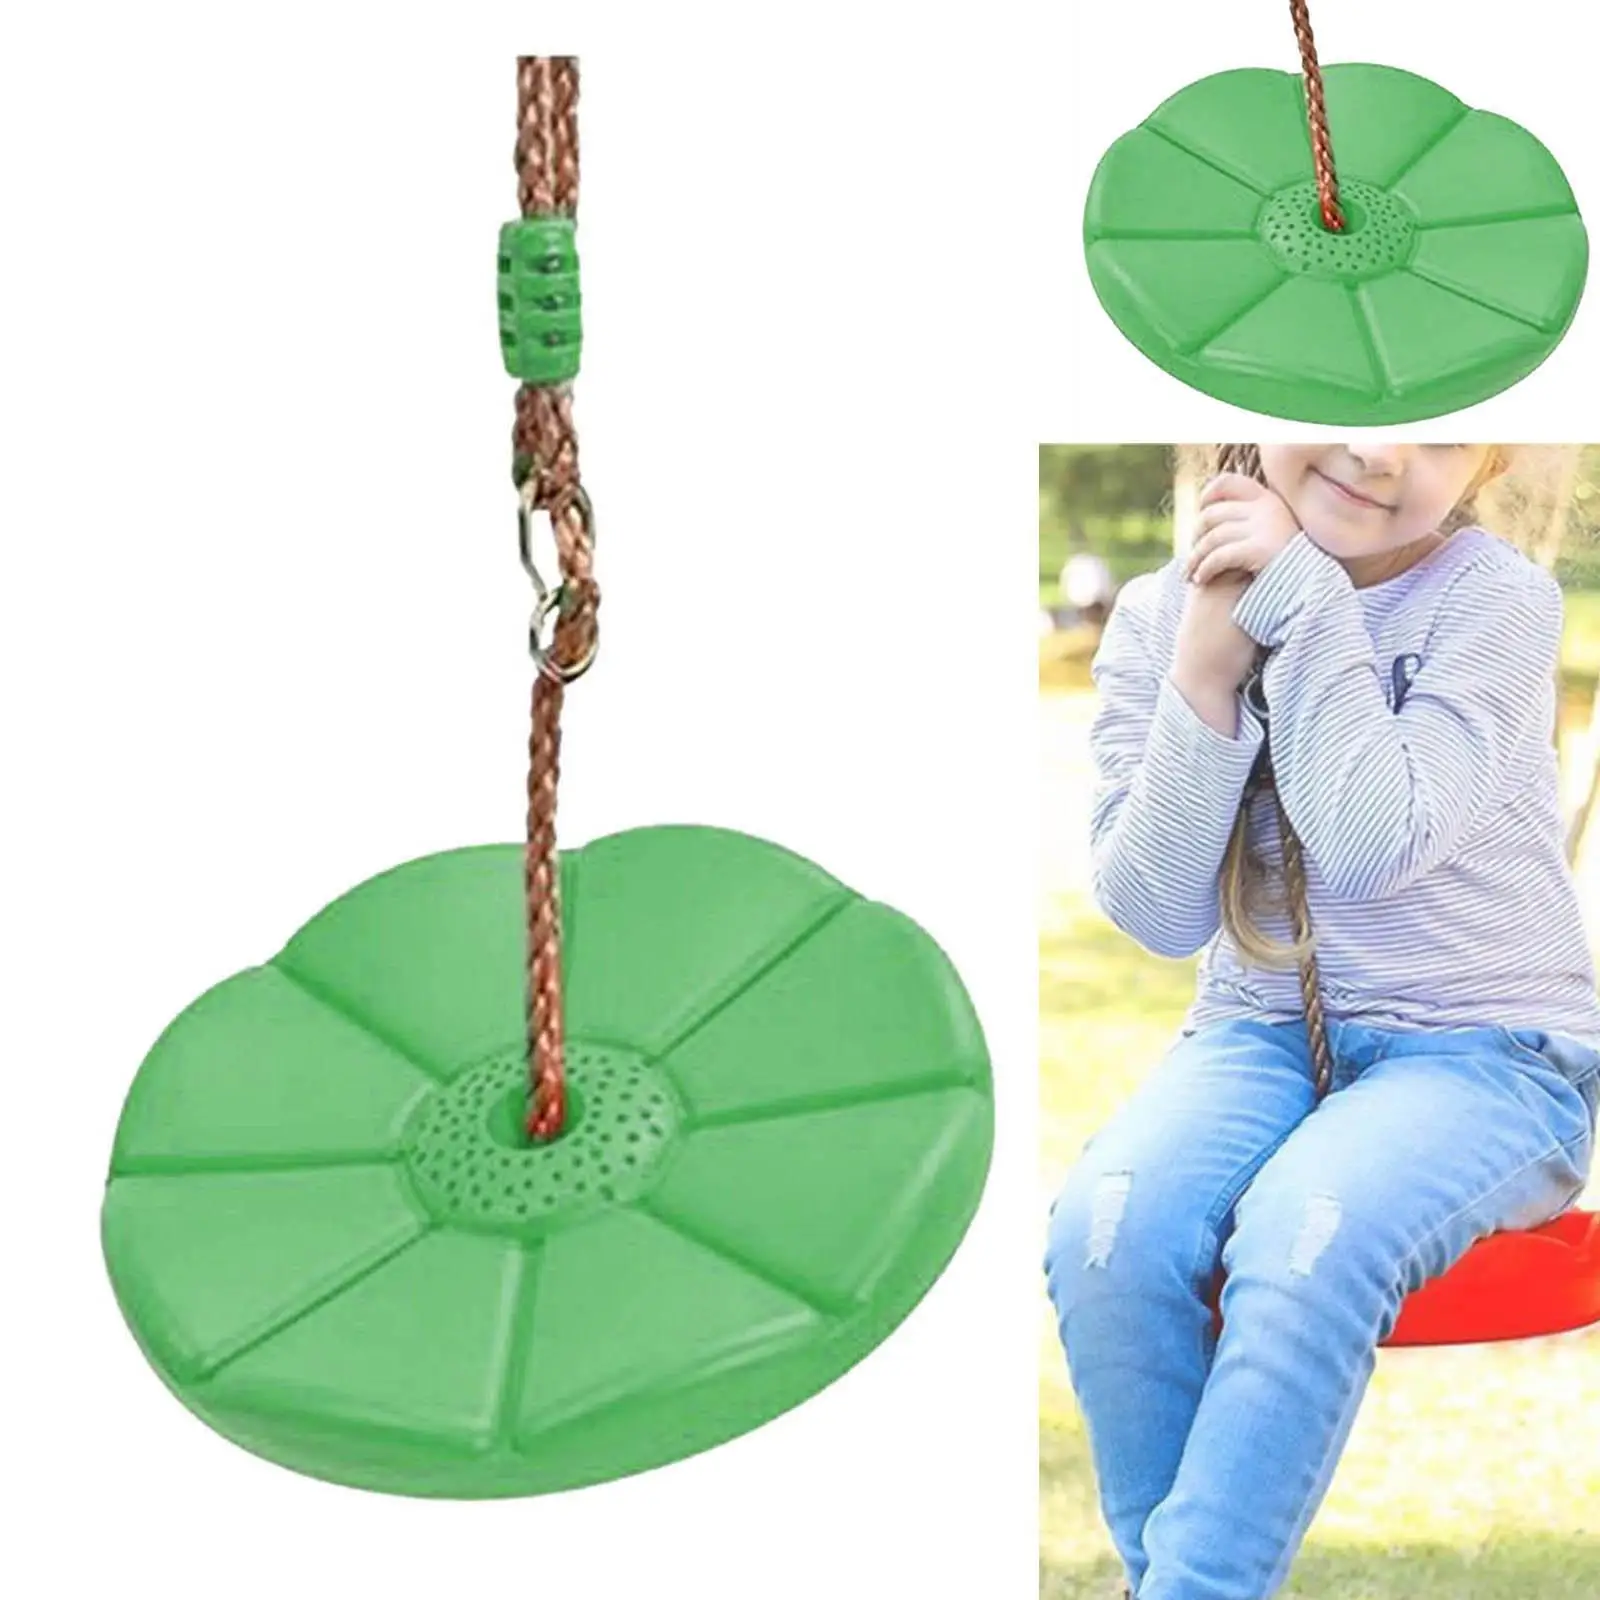  Disc, Rope Swing Round Kids Swing  Disc Swing Can Holds 330lbs/150kg for 5+ Years Kids